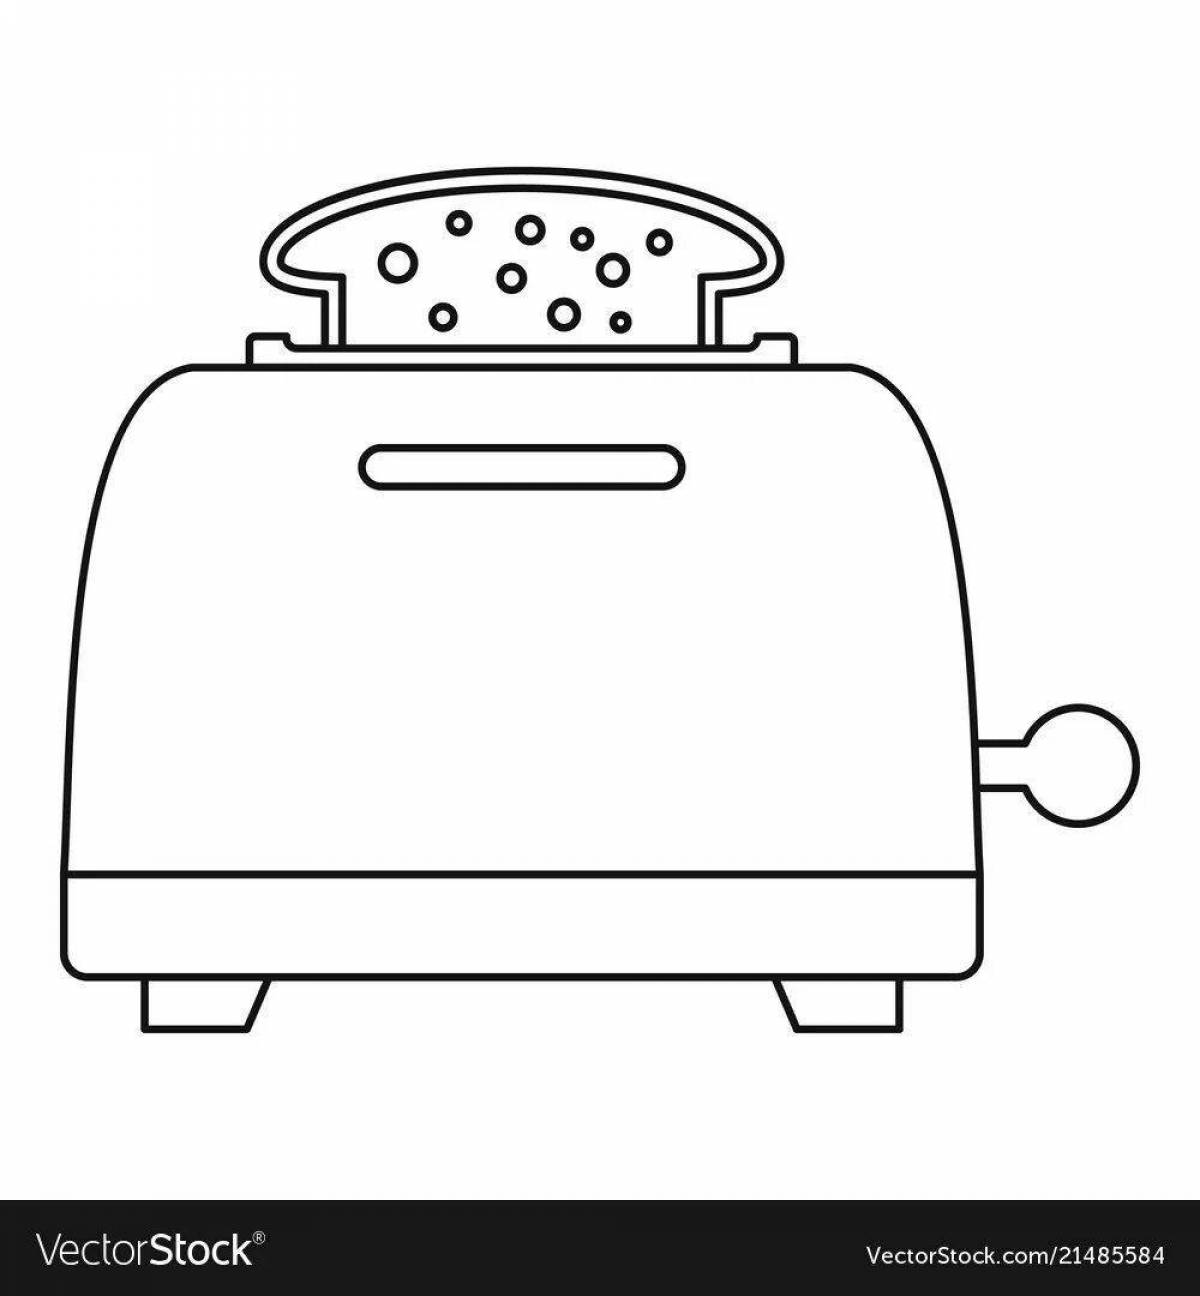 Incredible toaster coloring book